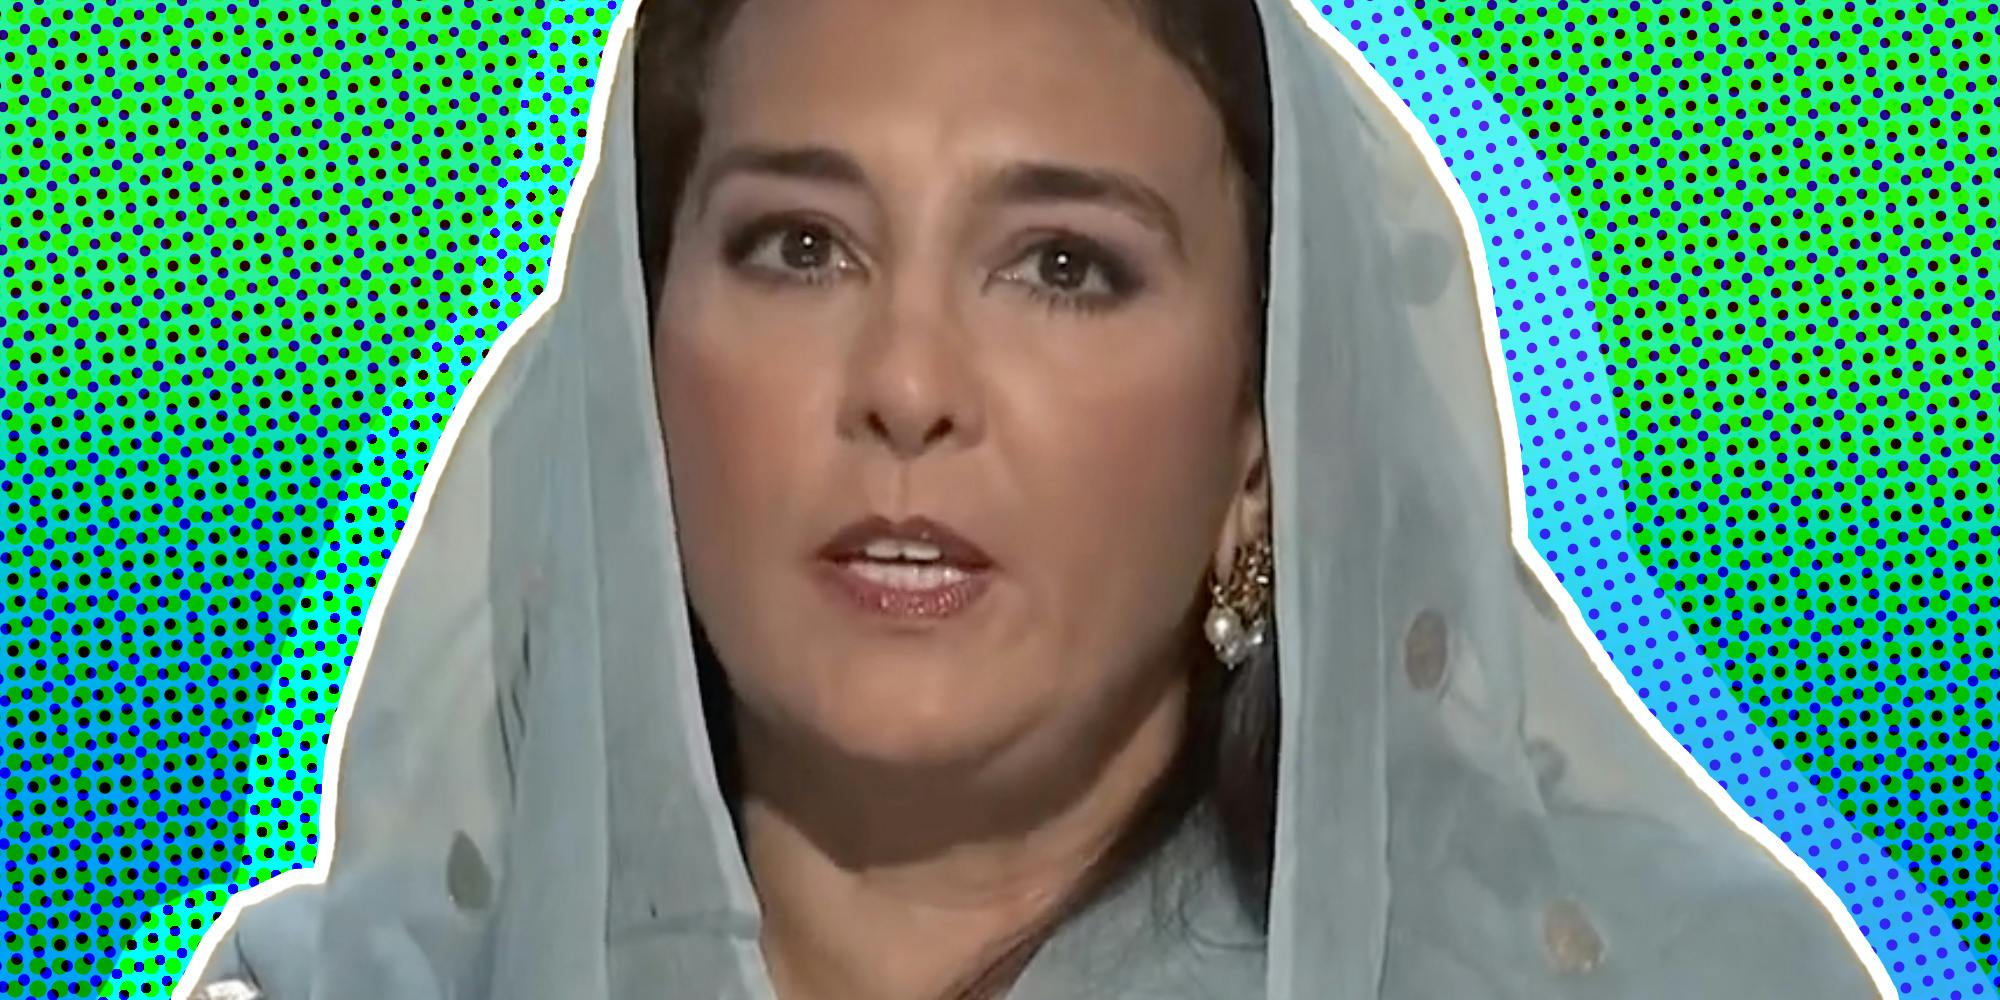 Harmeet Dhillon performs 'Ardas' Sikh prayer 2 days after attack on Trump at Republican National Convention